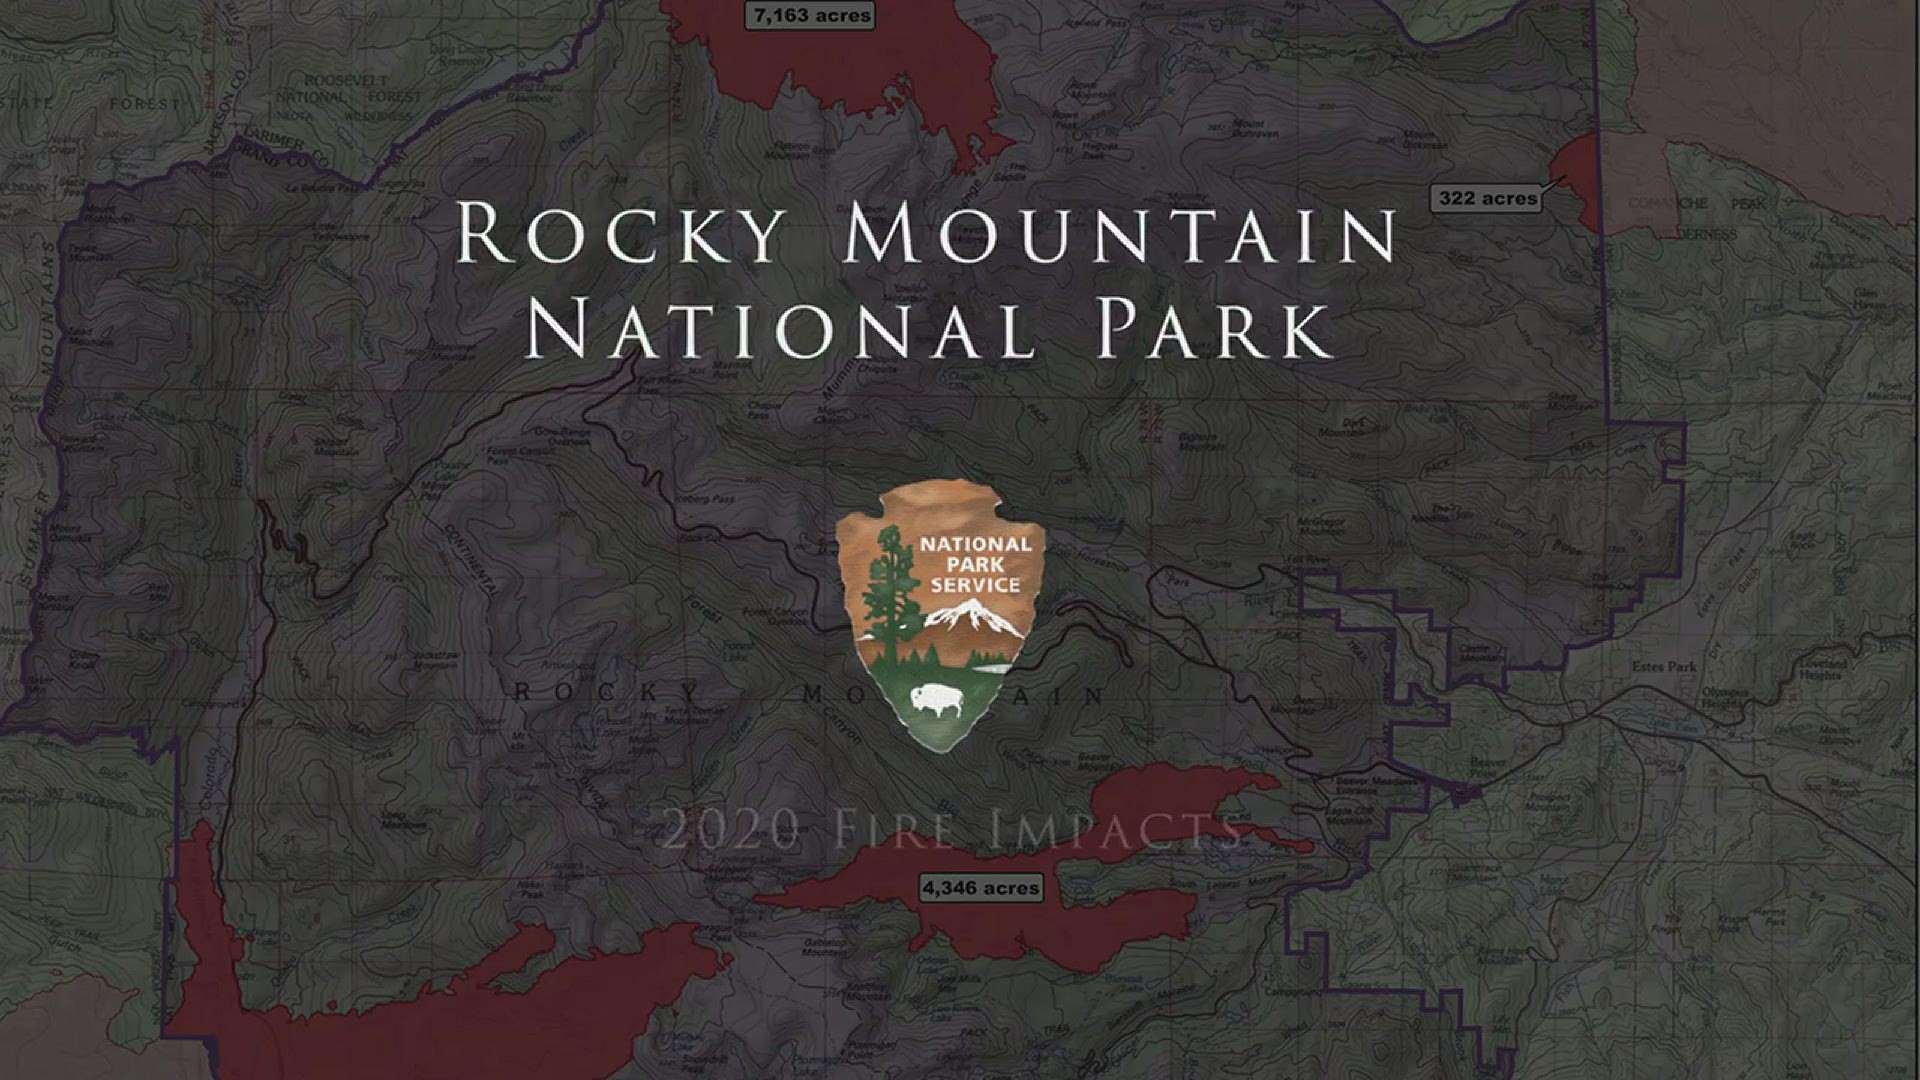 RMNP shared this video of damage caused by the East Troublesome Fire, which impacted about 30,000 acres of the park.